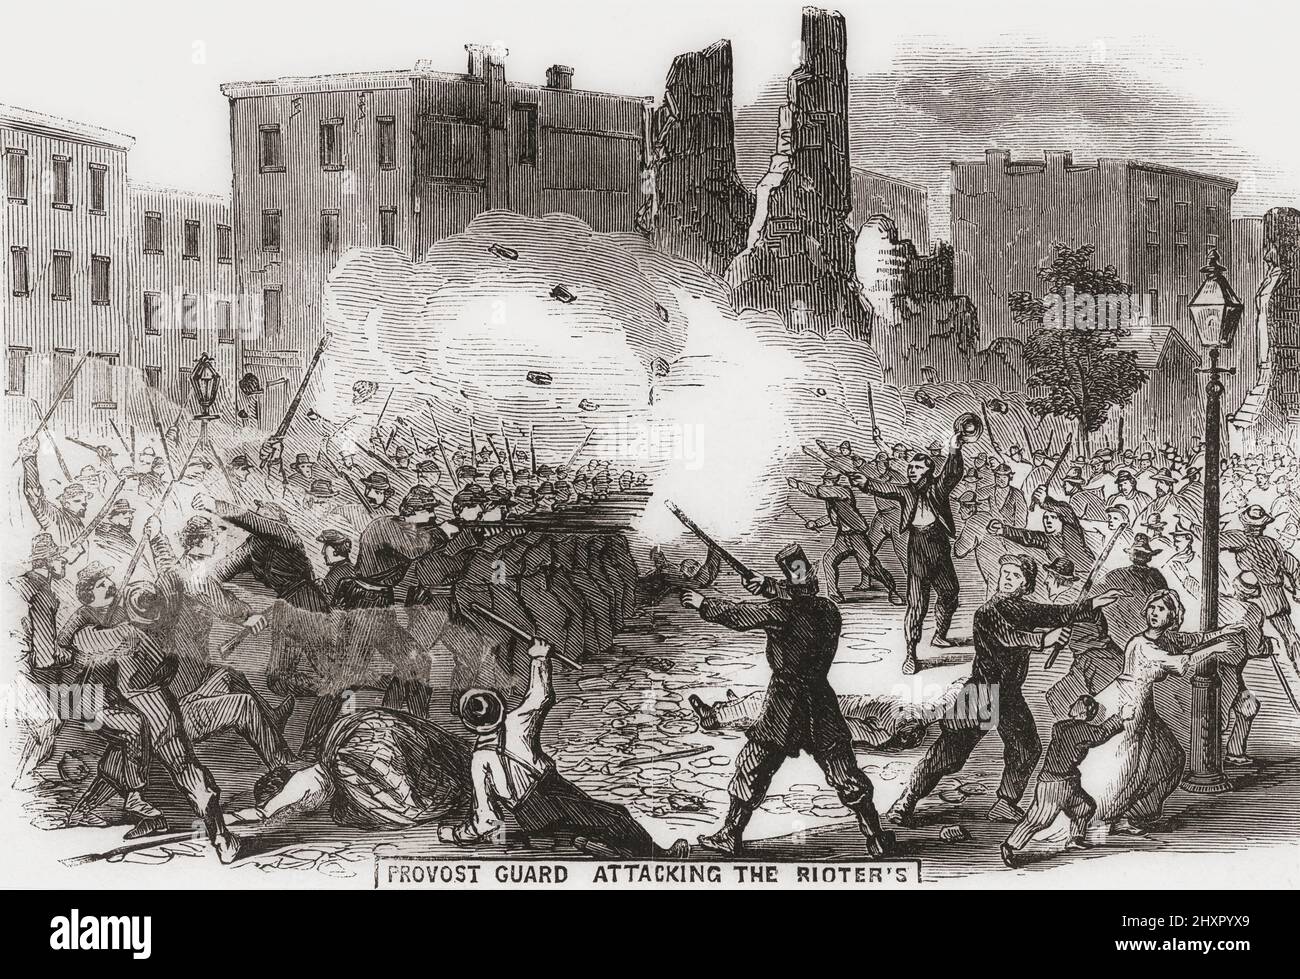 Provost Guards attacking the rioters.  New York draft riots, 13 - 16 July, 1863.  The riots occured in response to Congress passing a law to draft men to fight in the American Civil War.  In the incident shown in the picture provosts unsuccesfully tried to disperse rioters with a volley of gunfire. The mob turned on them, injuring 14 soldiers and possibly killing one. Stock Photo